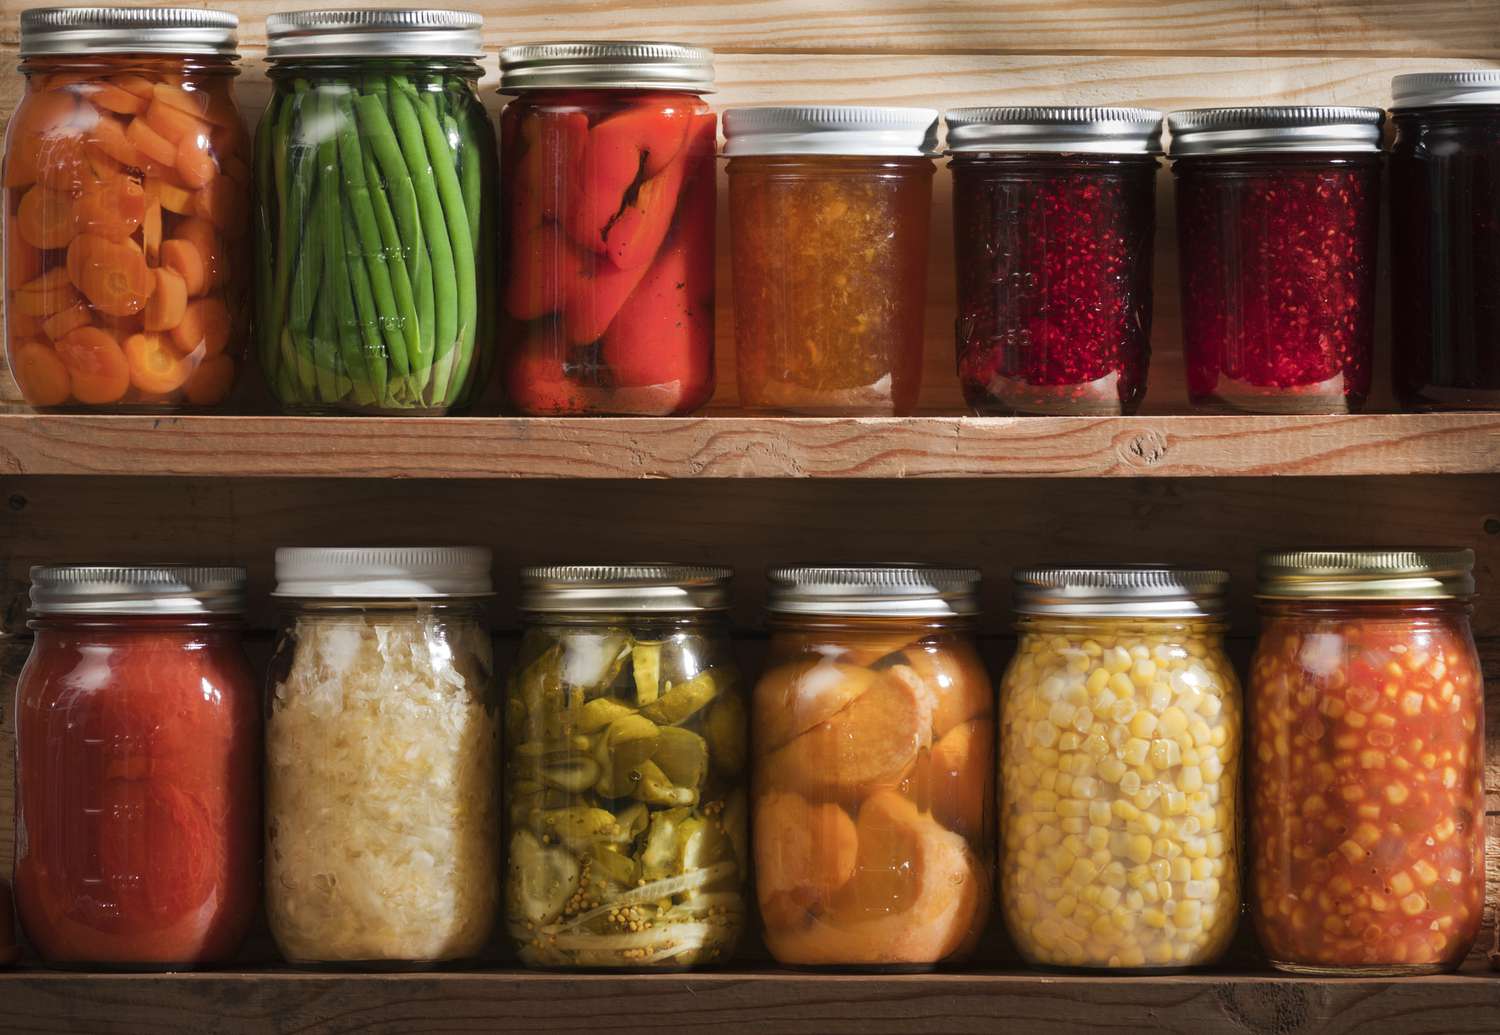 How To Store Vegetables Long-Term Without Refrigeration